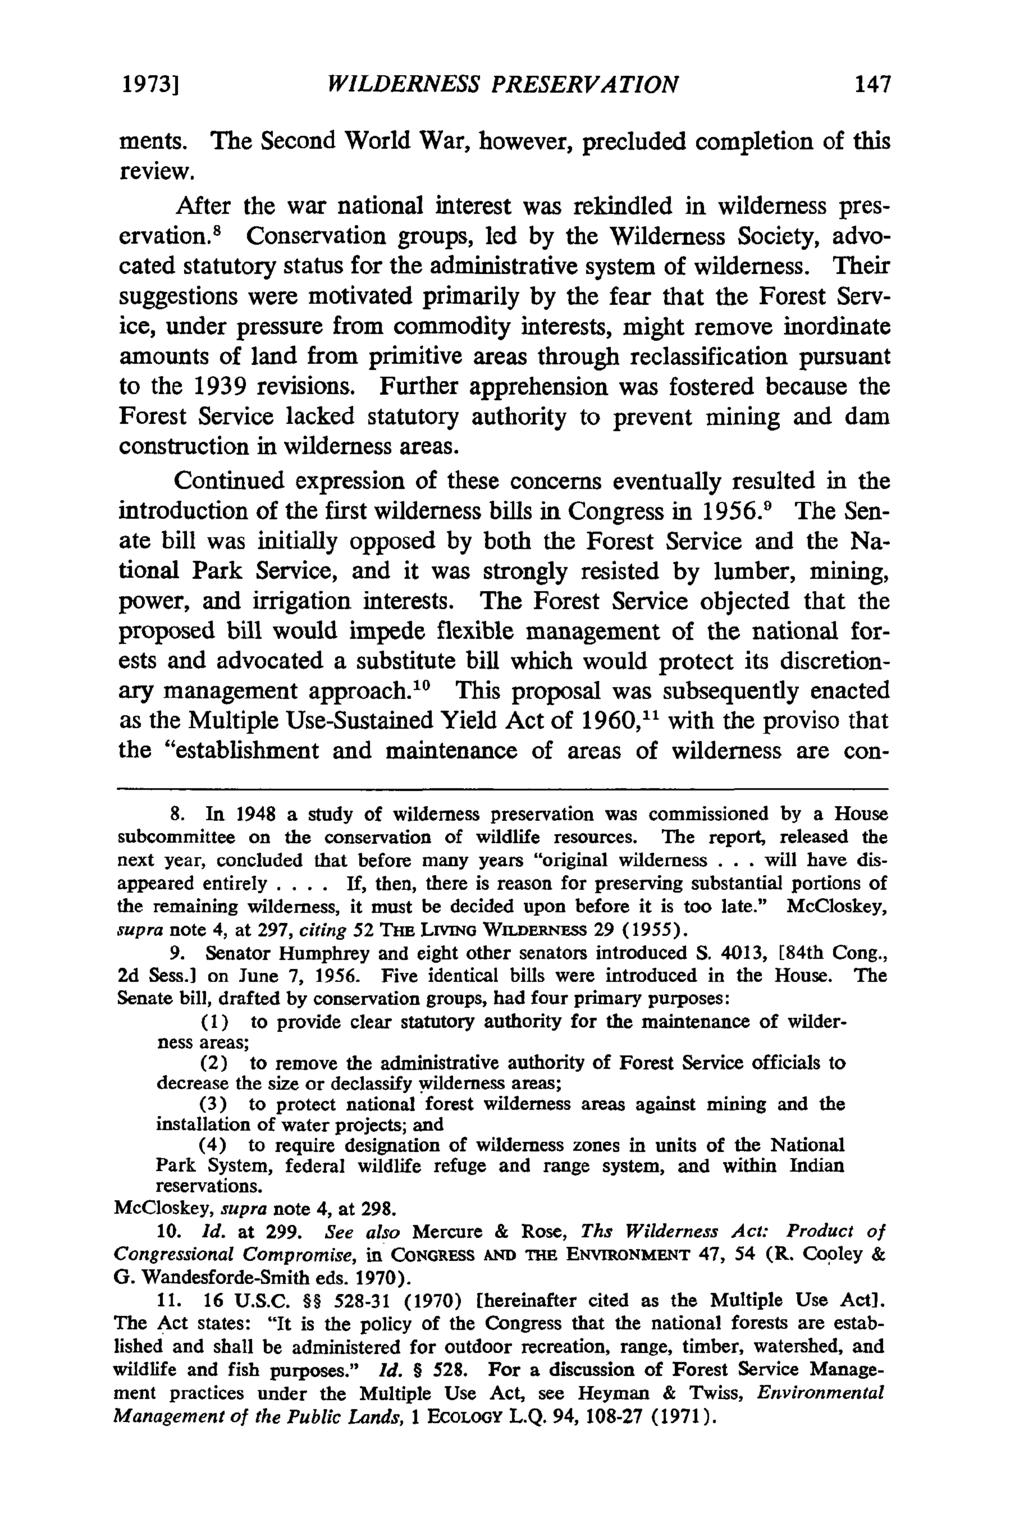 1973] WILDERNESS PRESERVATION ments. The Second World War, however, precluded completion of this review. After the war national interest was rekindled in wilderness preservation.